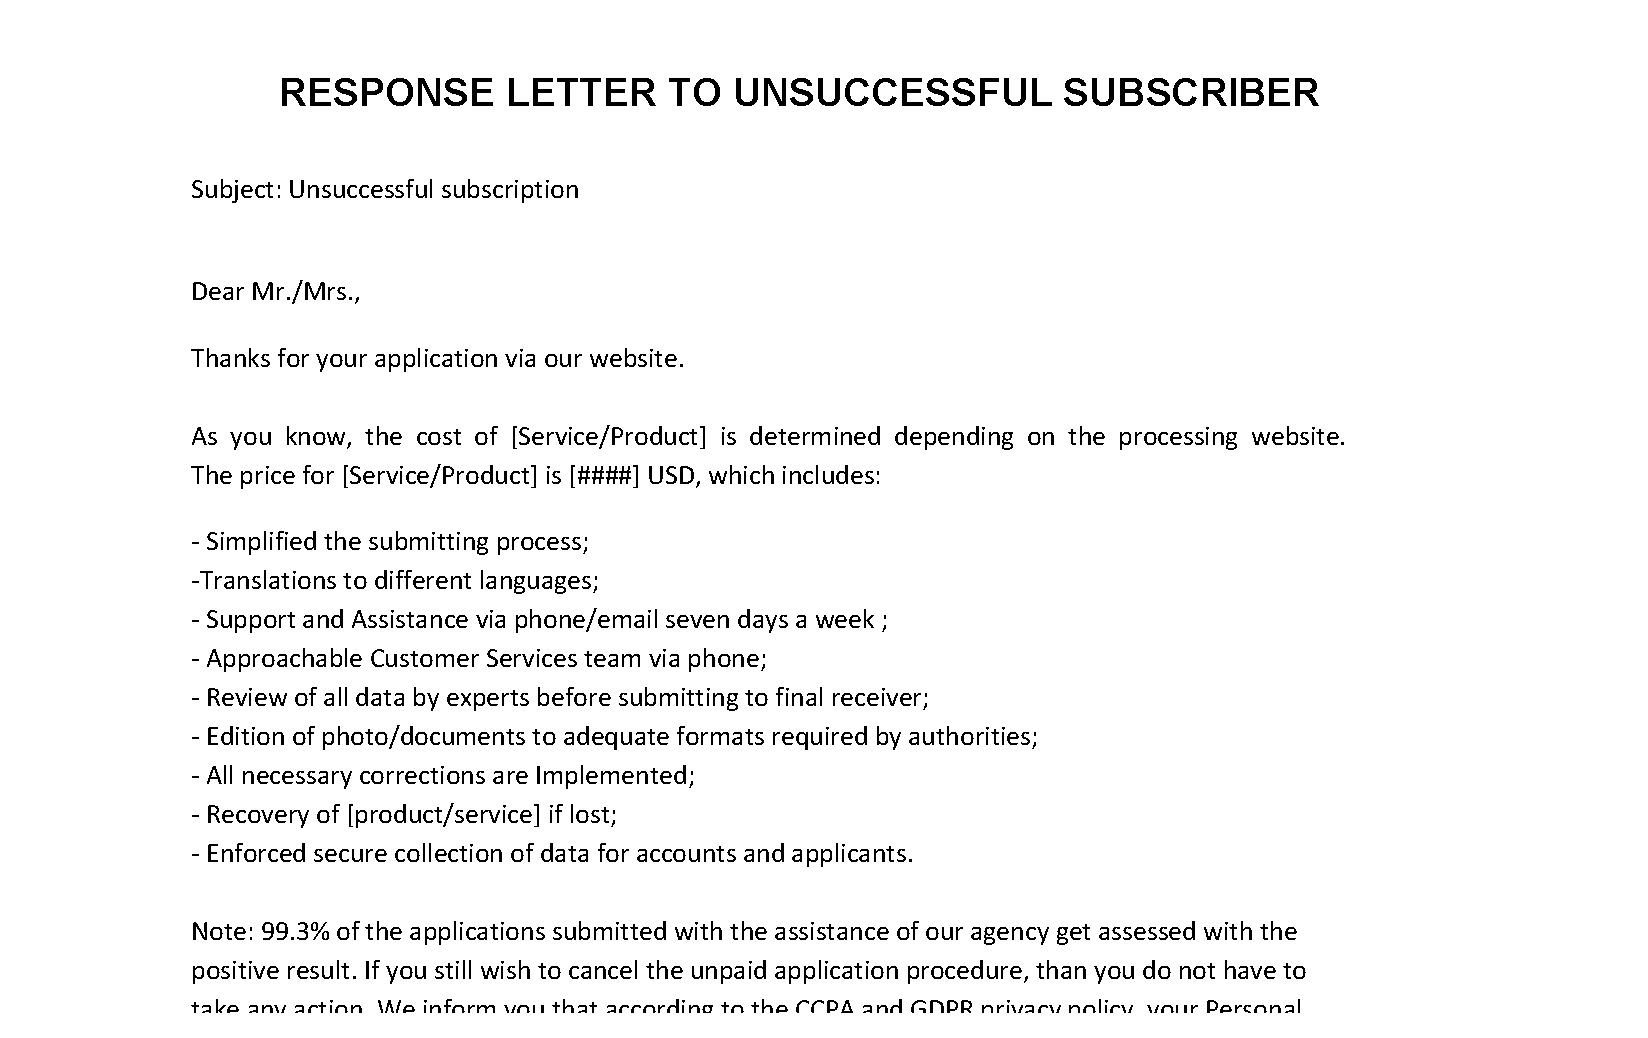 CCPA Response Letter to Unsuccessful Subscriber main image